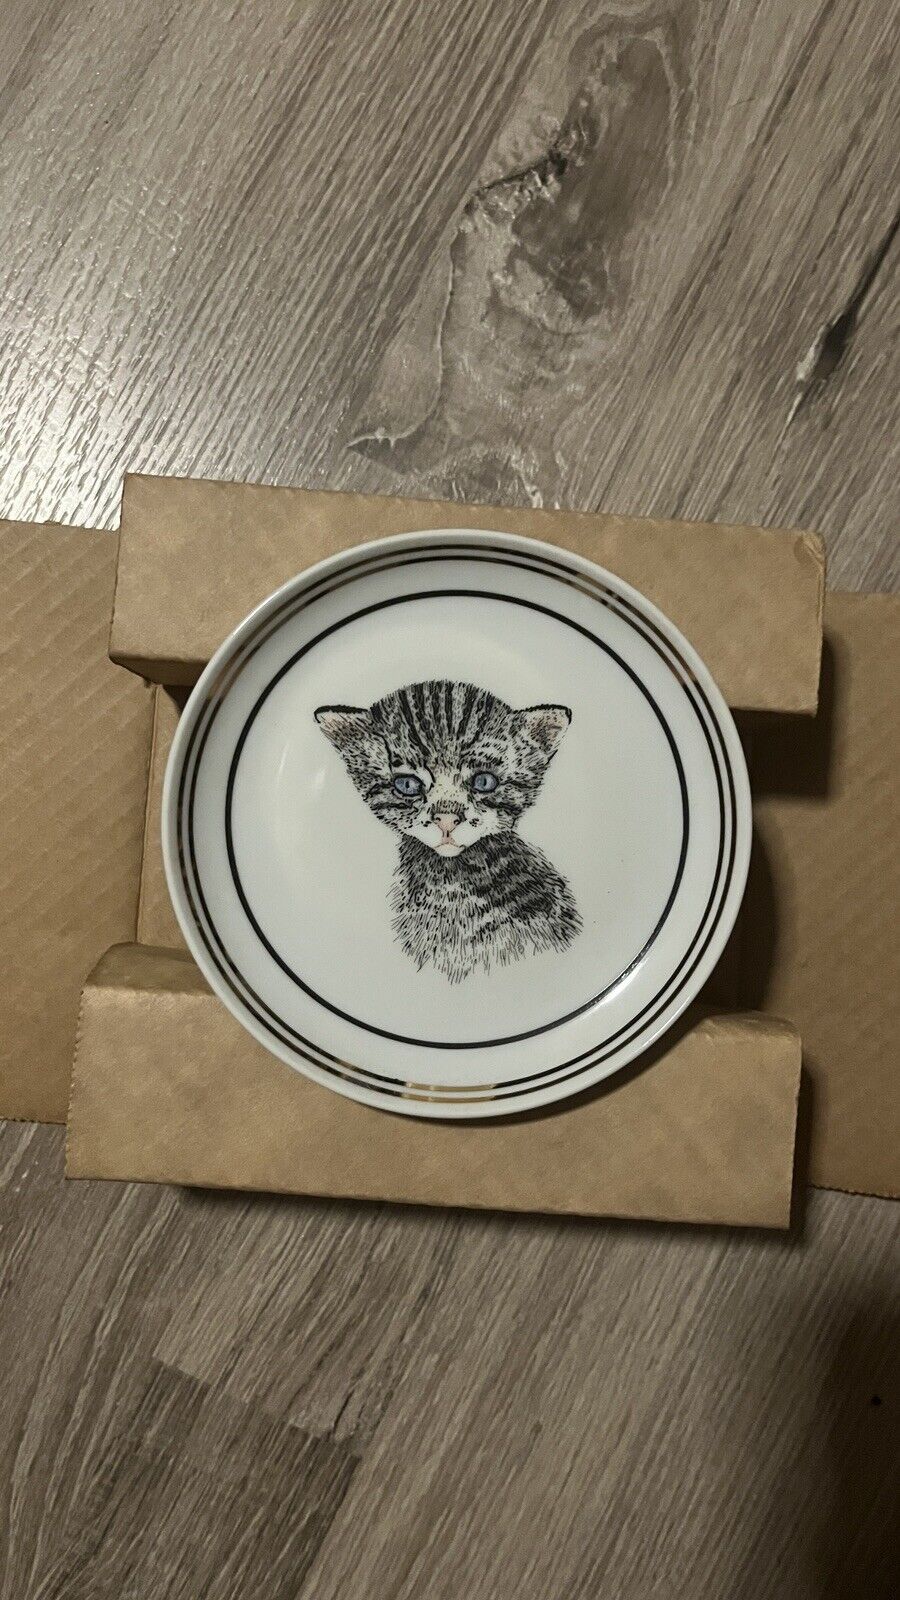 Chessie Kitten Railroad Cat Plate Kitten No. Two 1959 Museum B&O Limited Edition